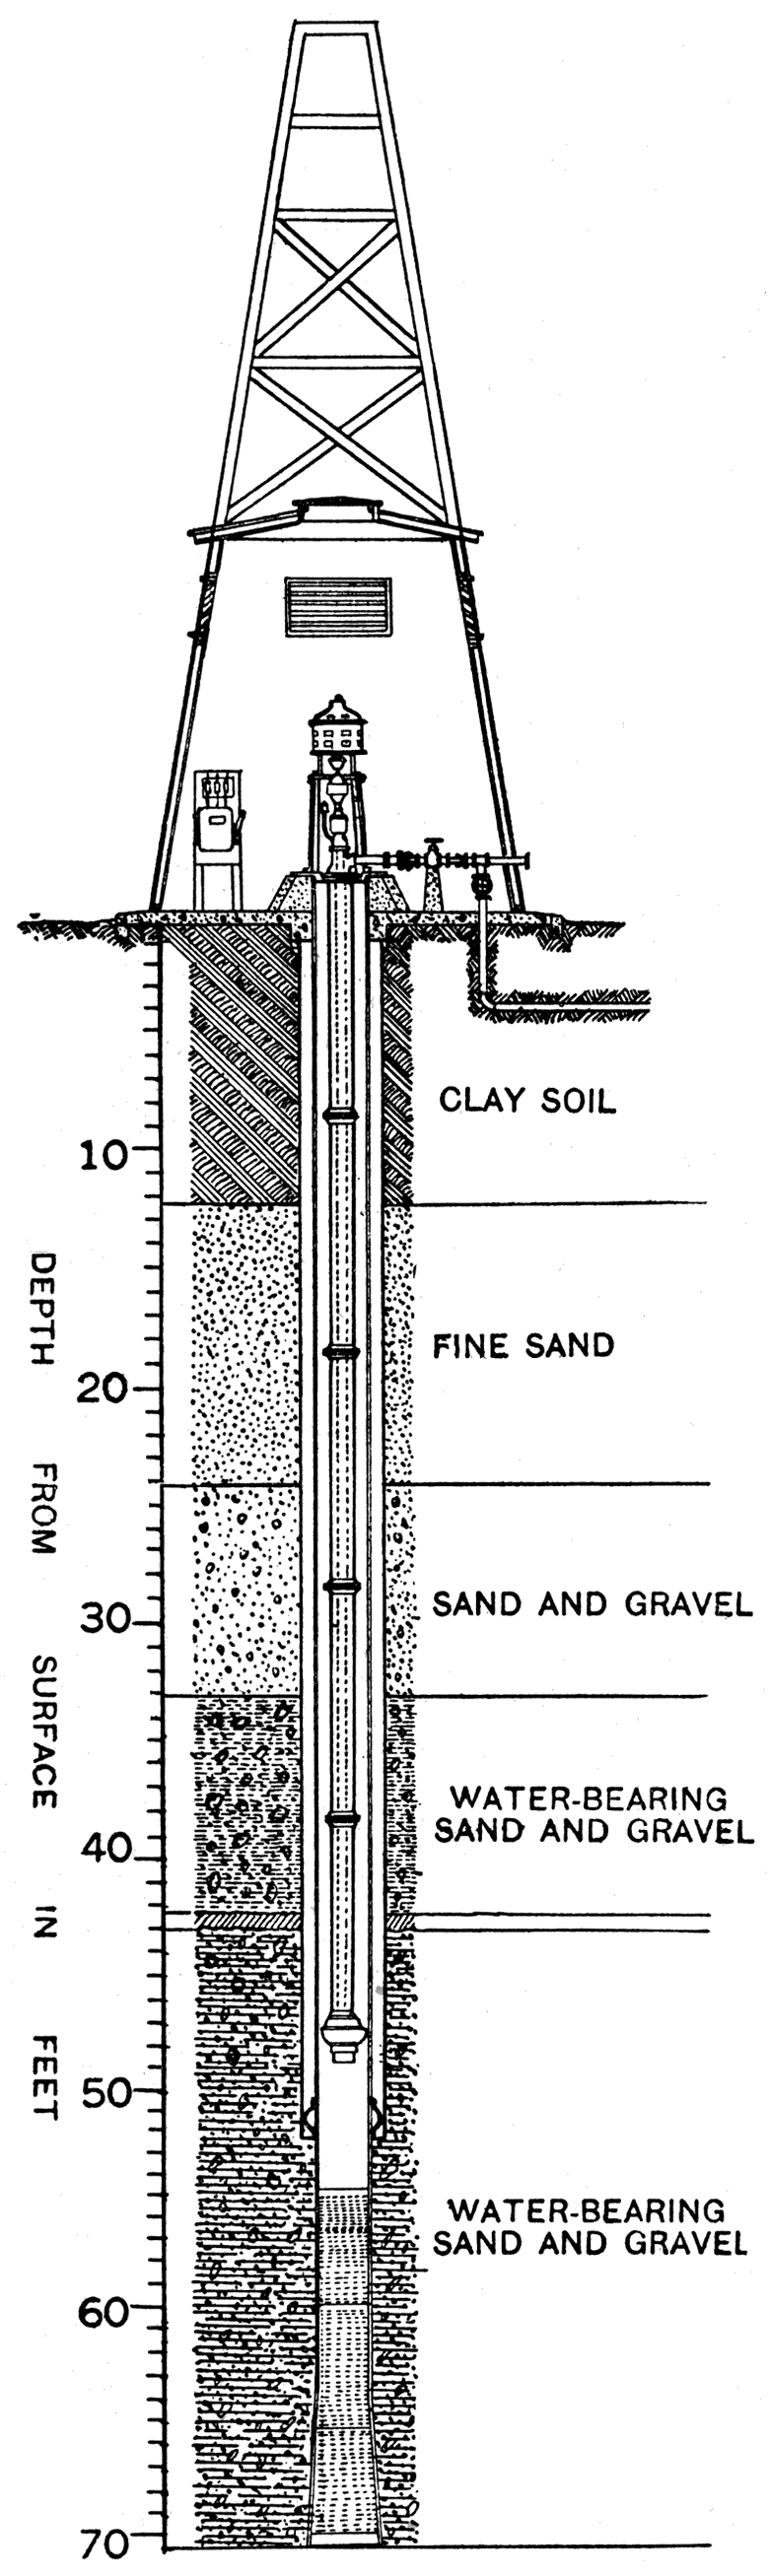 Section of water well on the Kansas river plain, one of eight which supply Camp Funston.